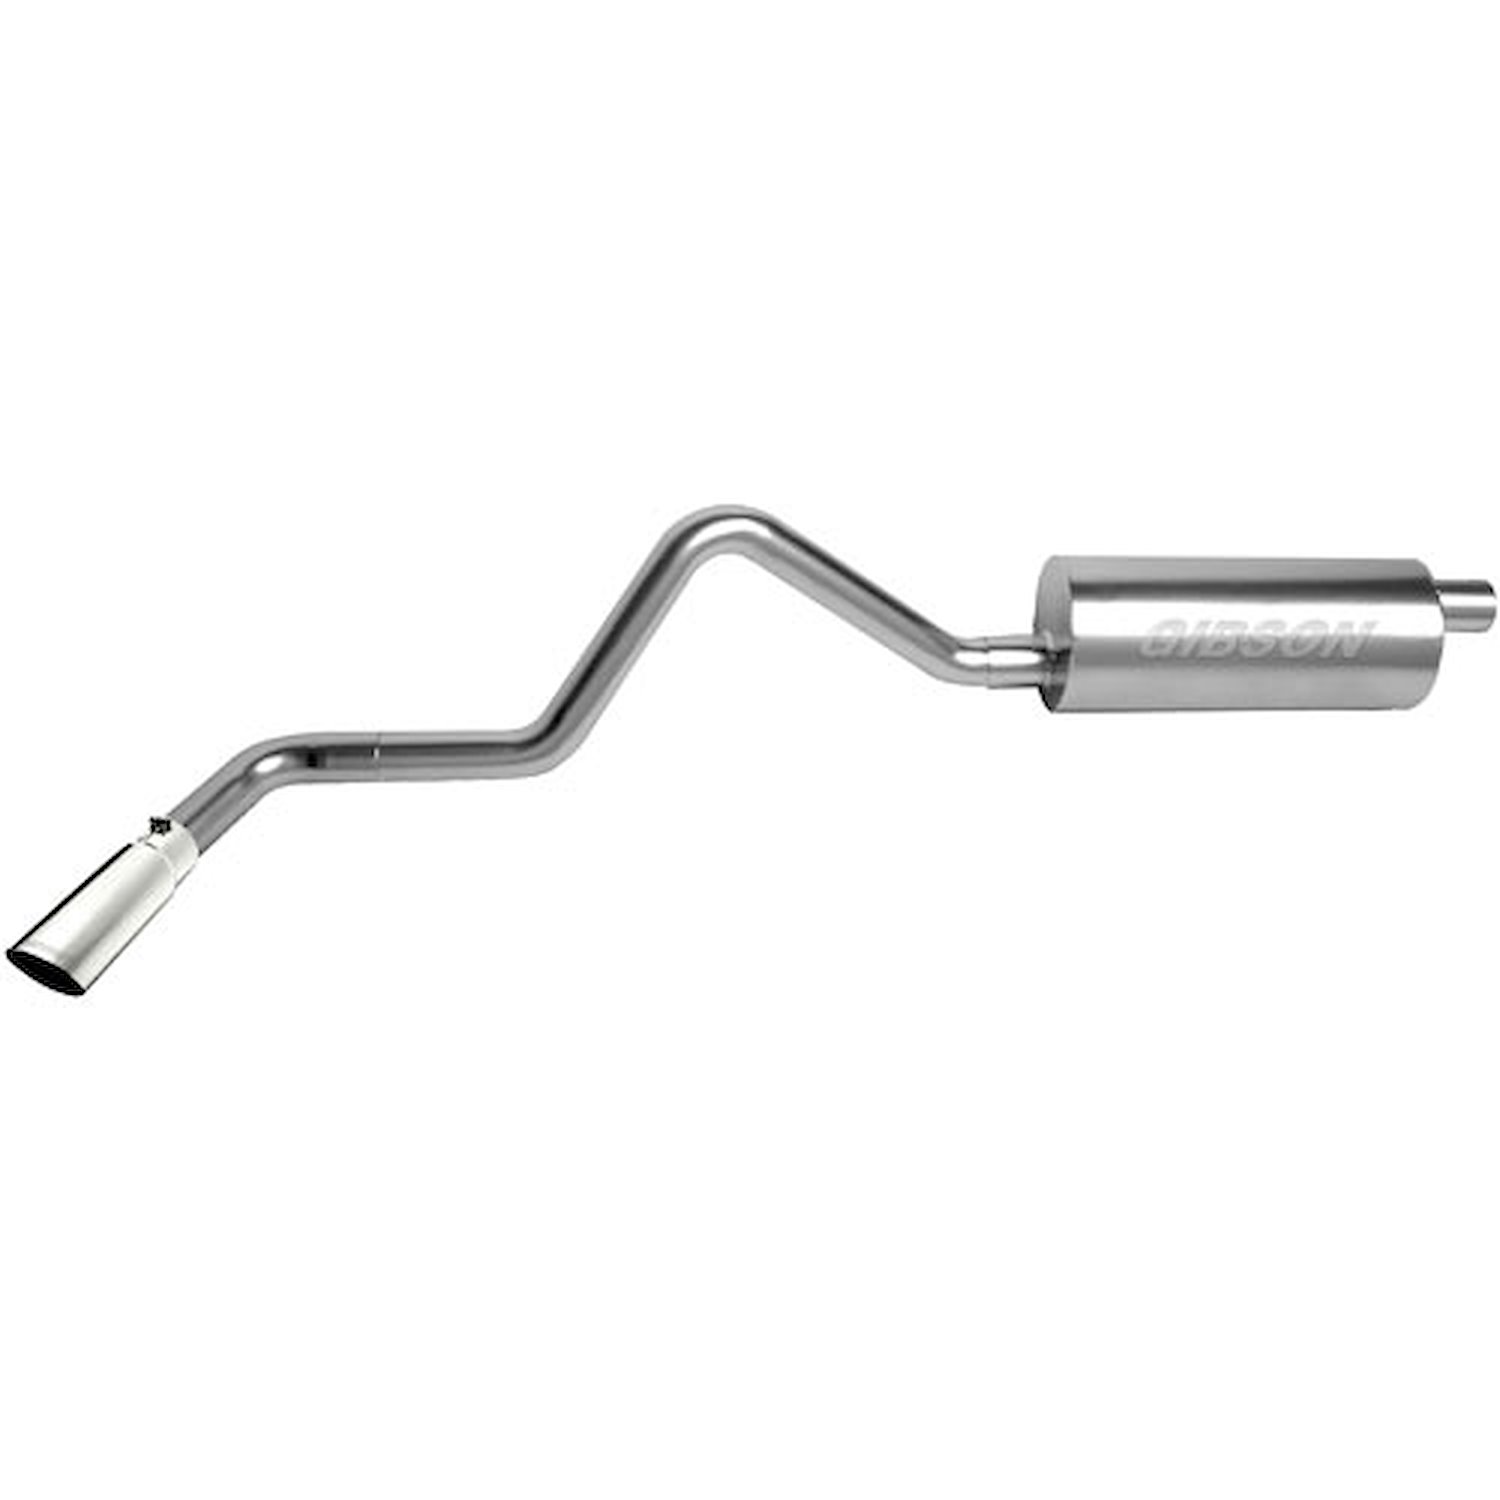 Swept-Side Cat-Back Exhaust 2001-04 Toyota Tacoma 2.7L/3.4L 2WD/4WD